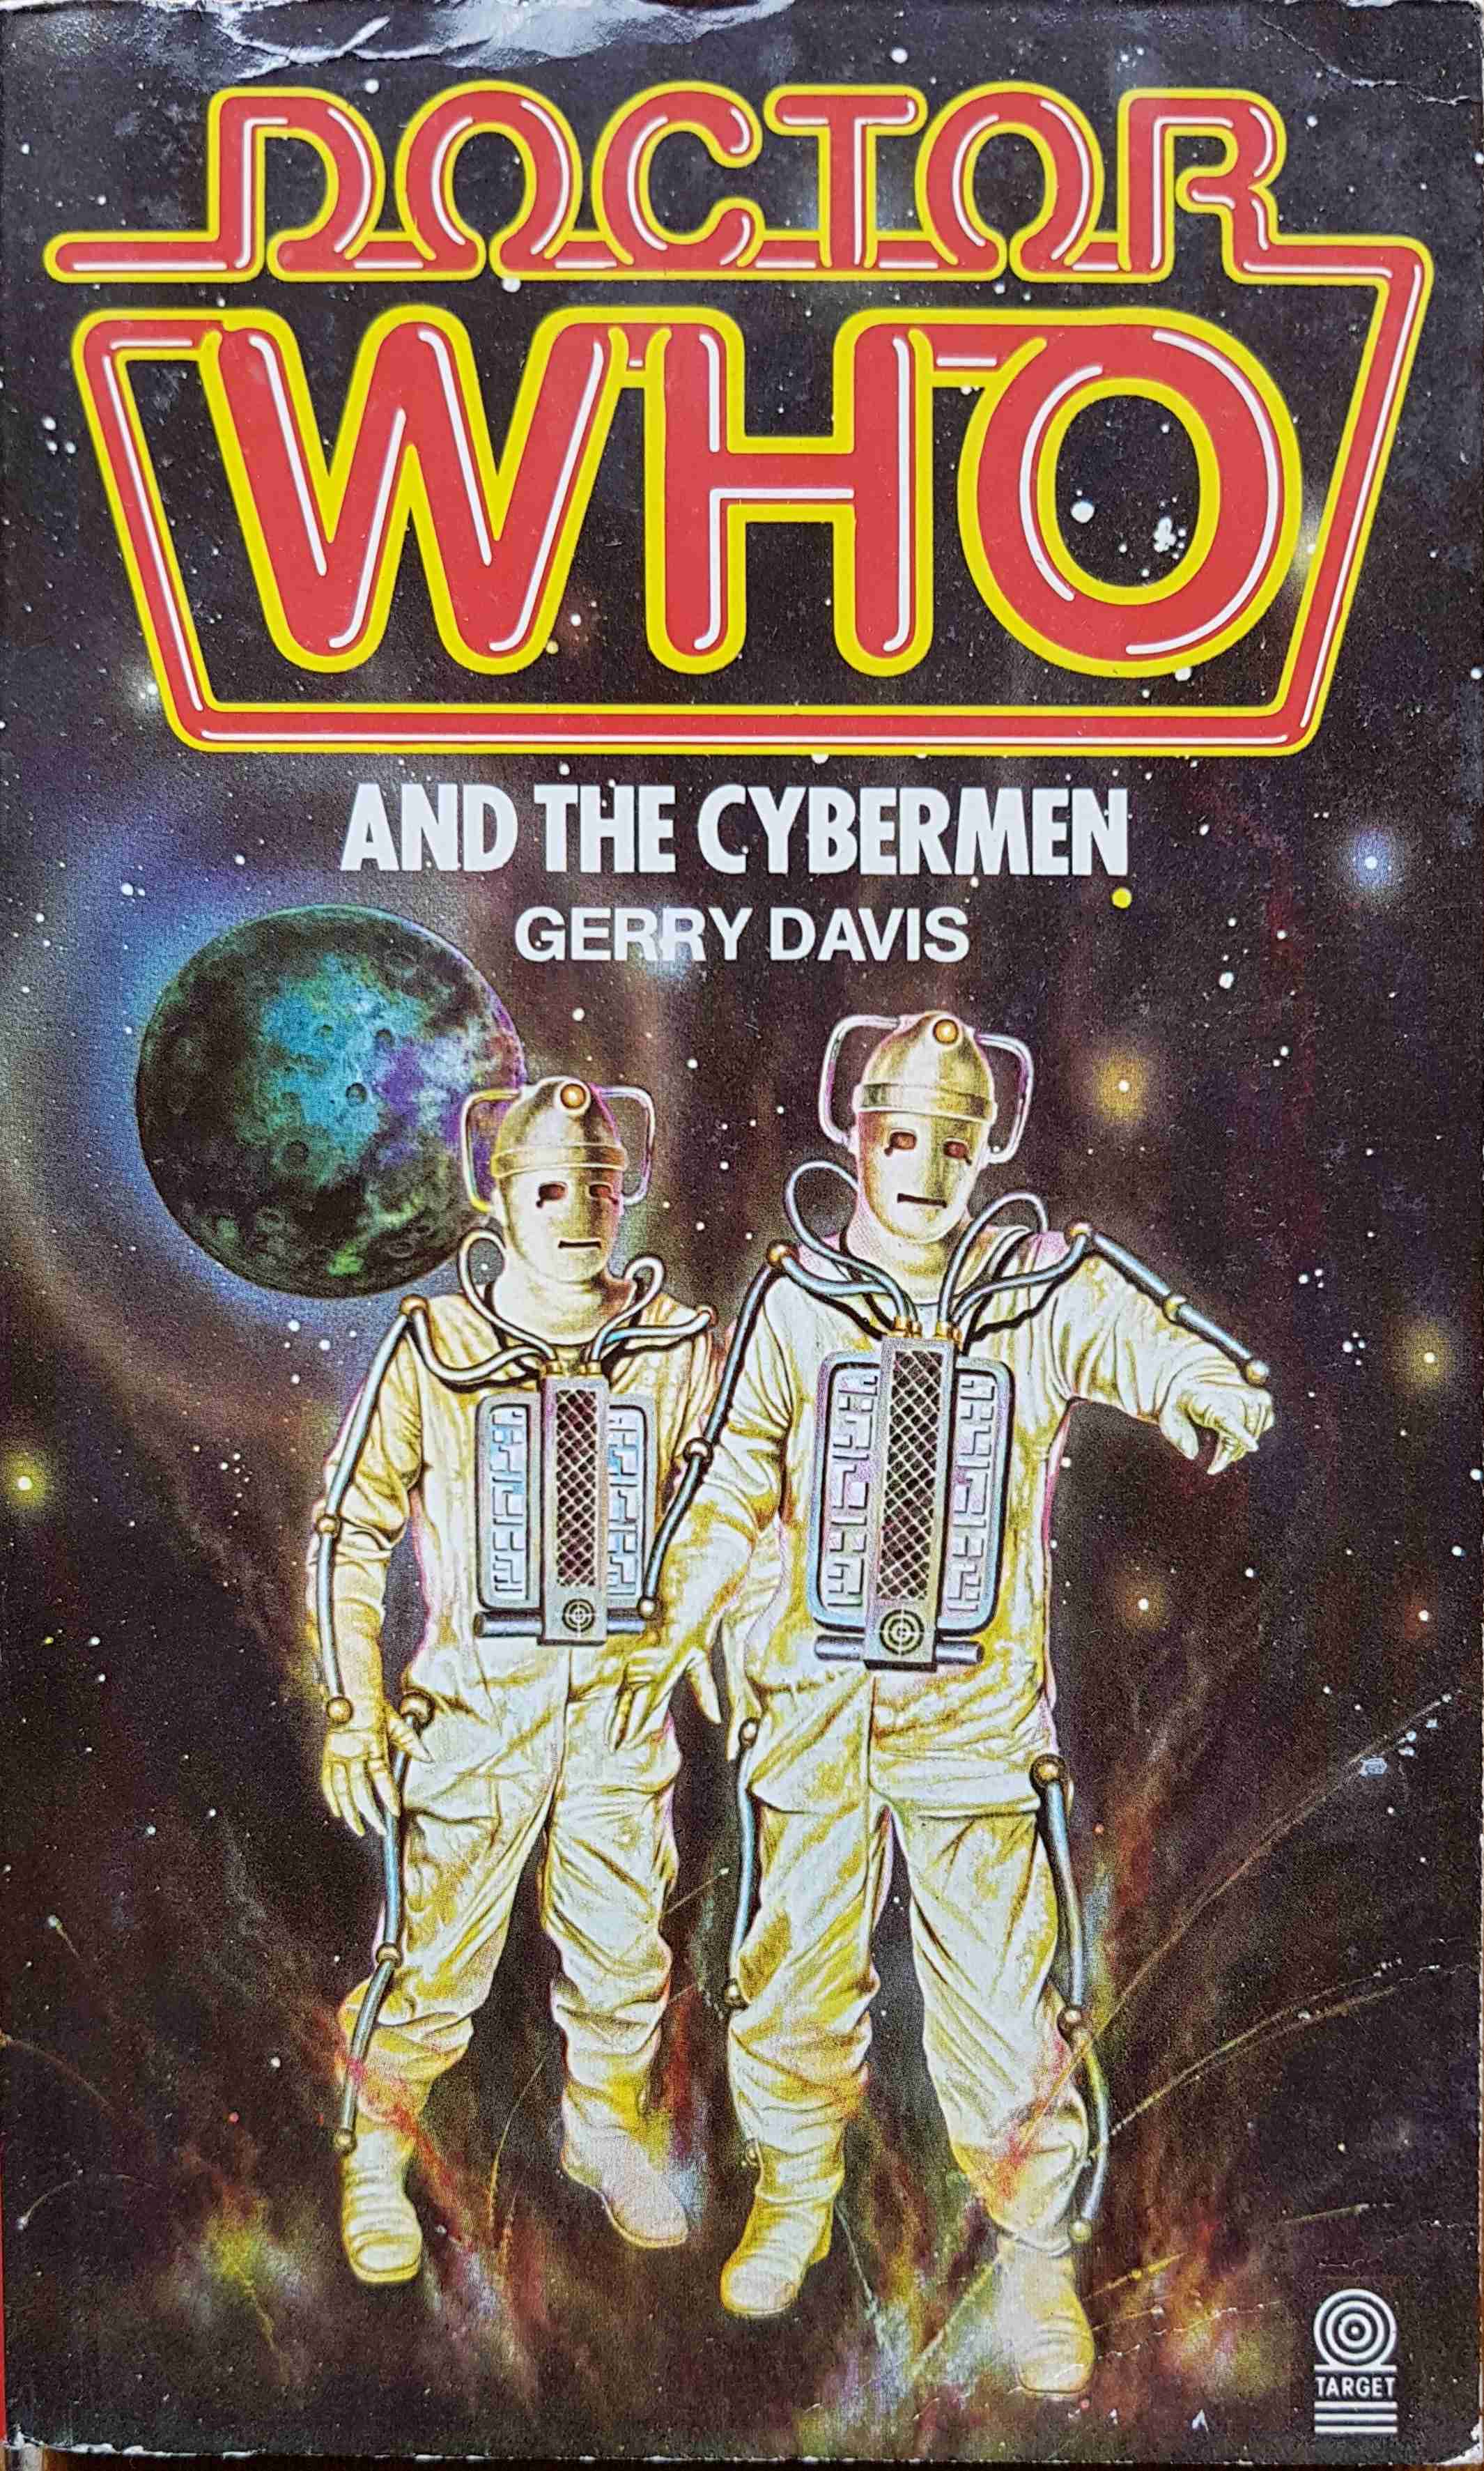 Picture of 0-426-11463-9 Doctor Who - The Cybermen by artist Gerry Davis from the BBC books - Records and Tapes library